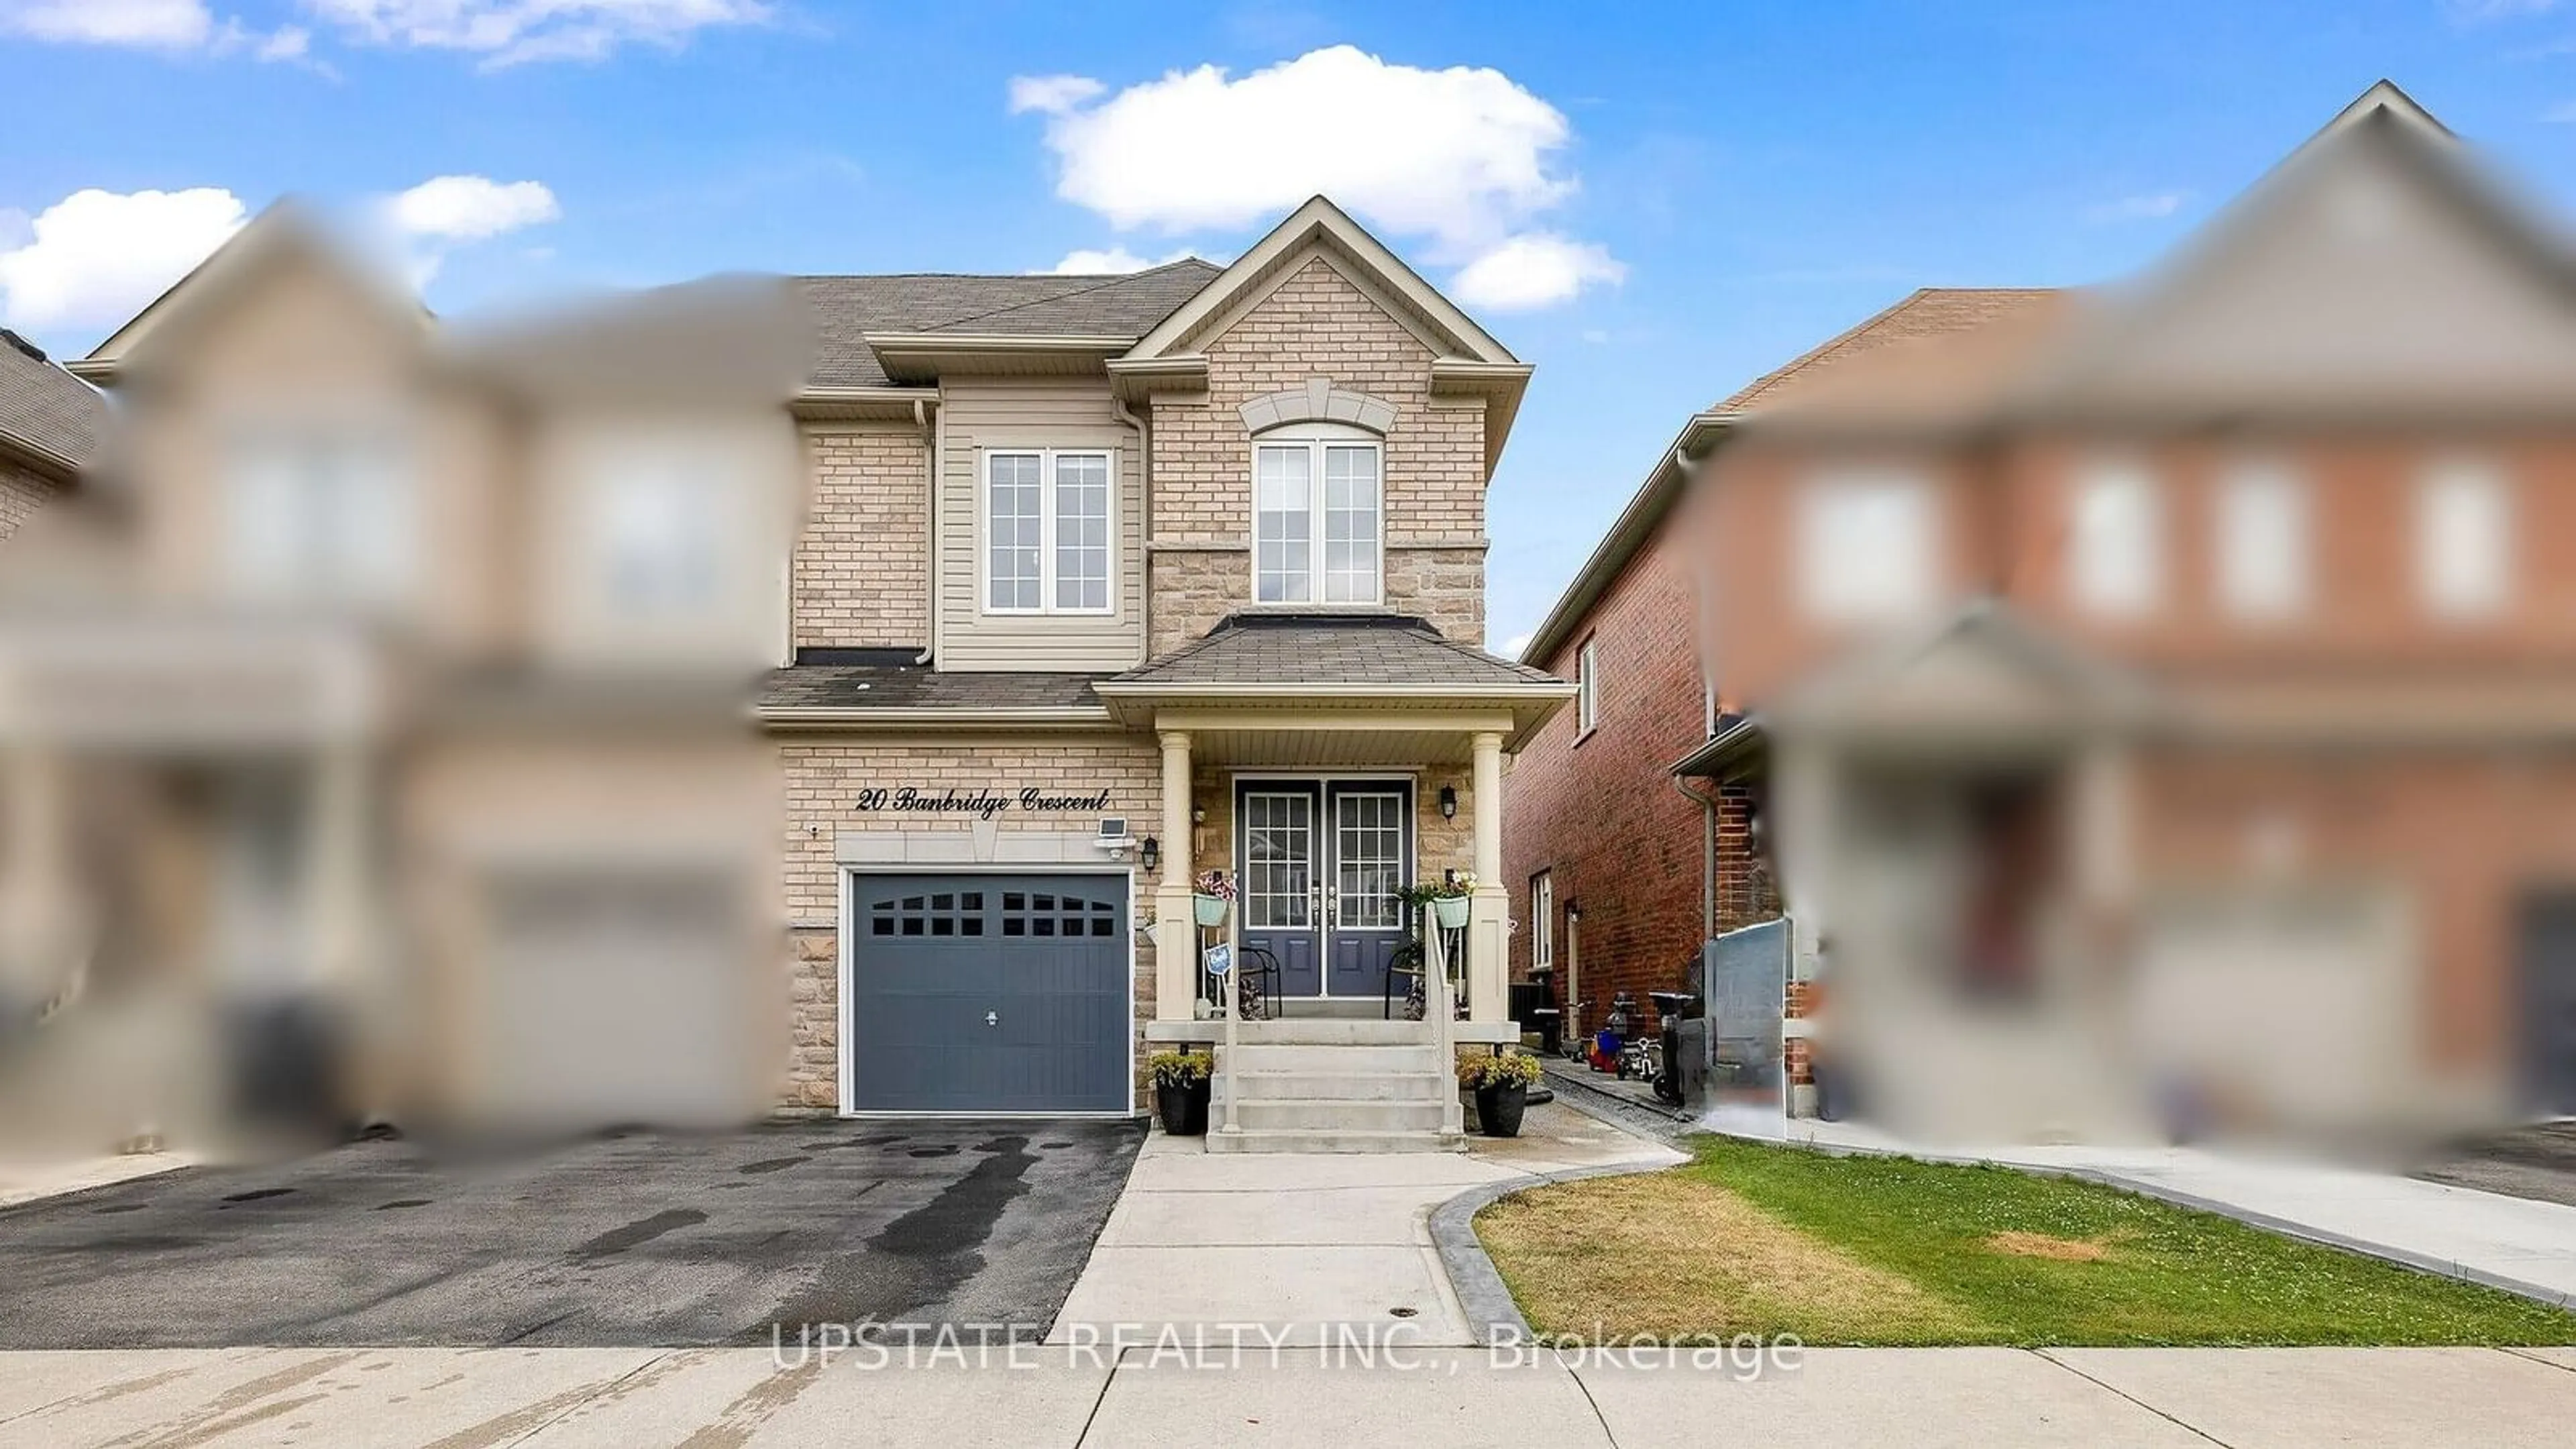 Frontside or backside of a home for 20 Banbridge Cres, Brampton Ontario L6X 5L9